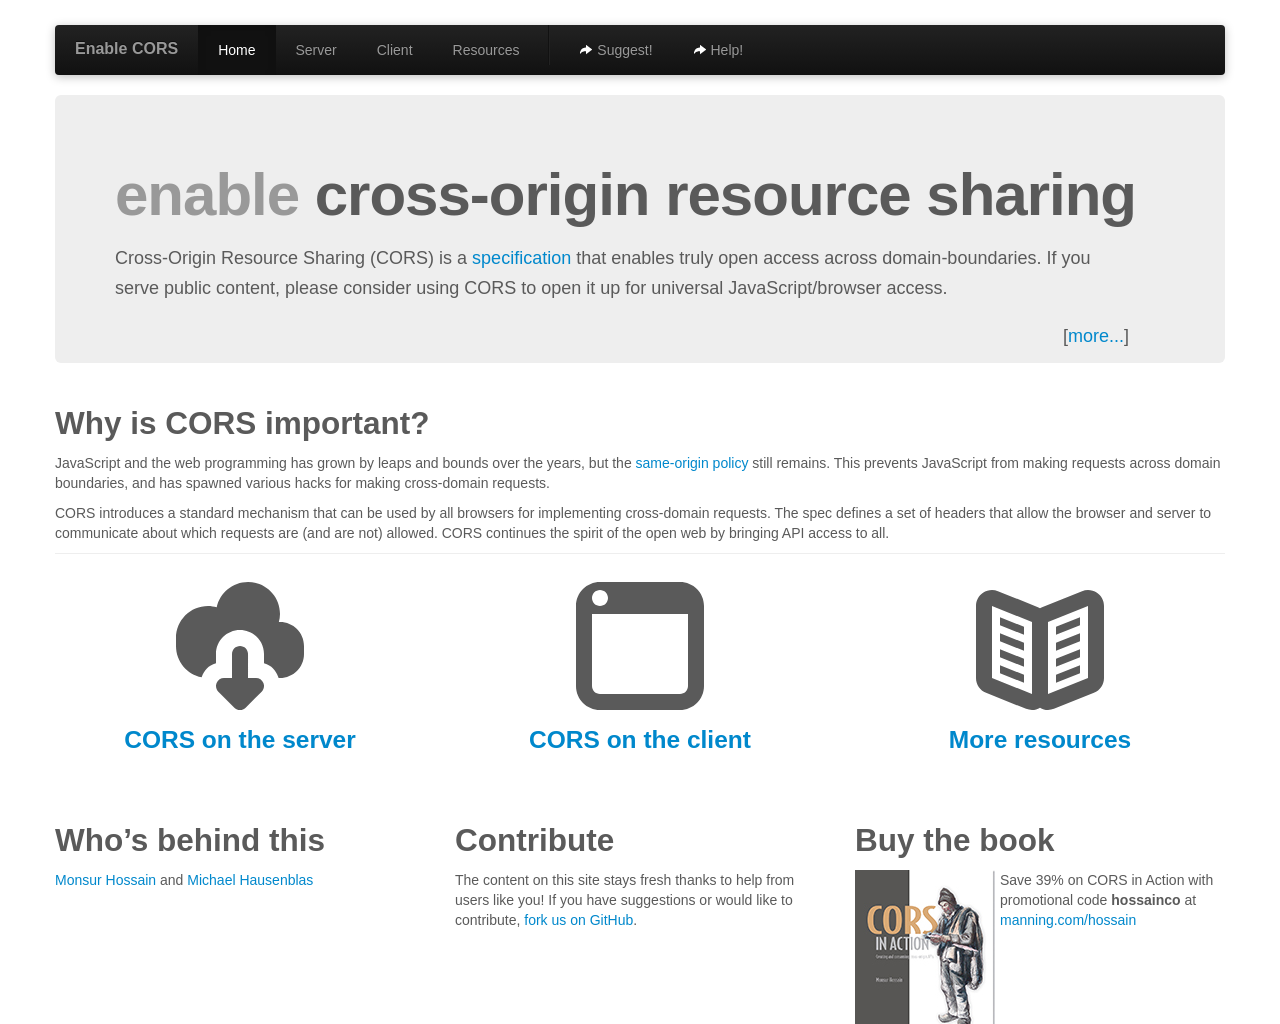 enable-cors.org